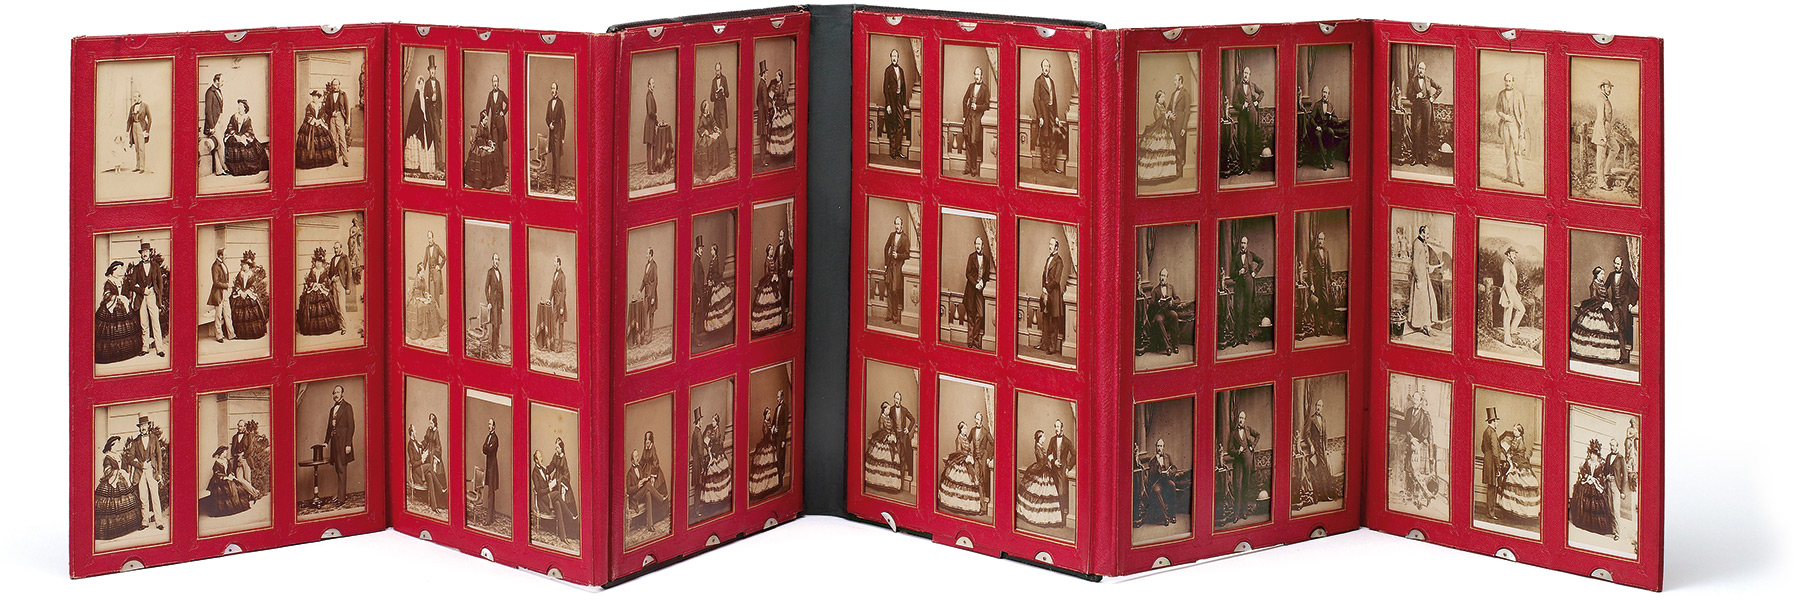 Portfolio of 54 portraits compiled by Queen Victoria, 1859–1861 by John Jabez Edwin Mayall, Camille Silvy, Frances Day and William Bambridge